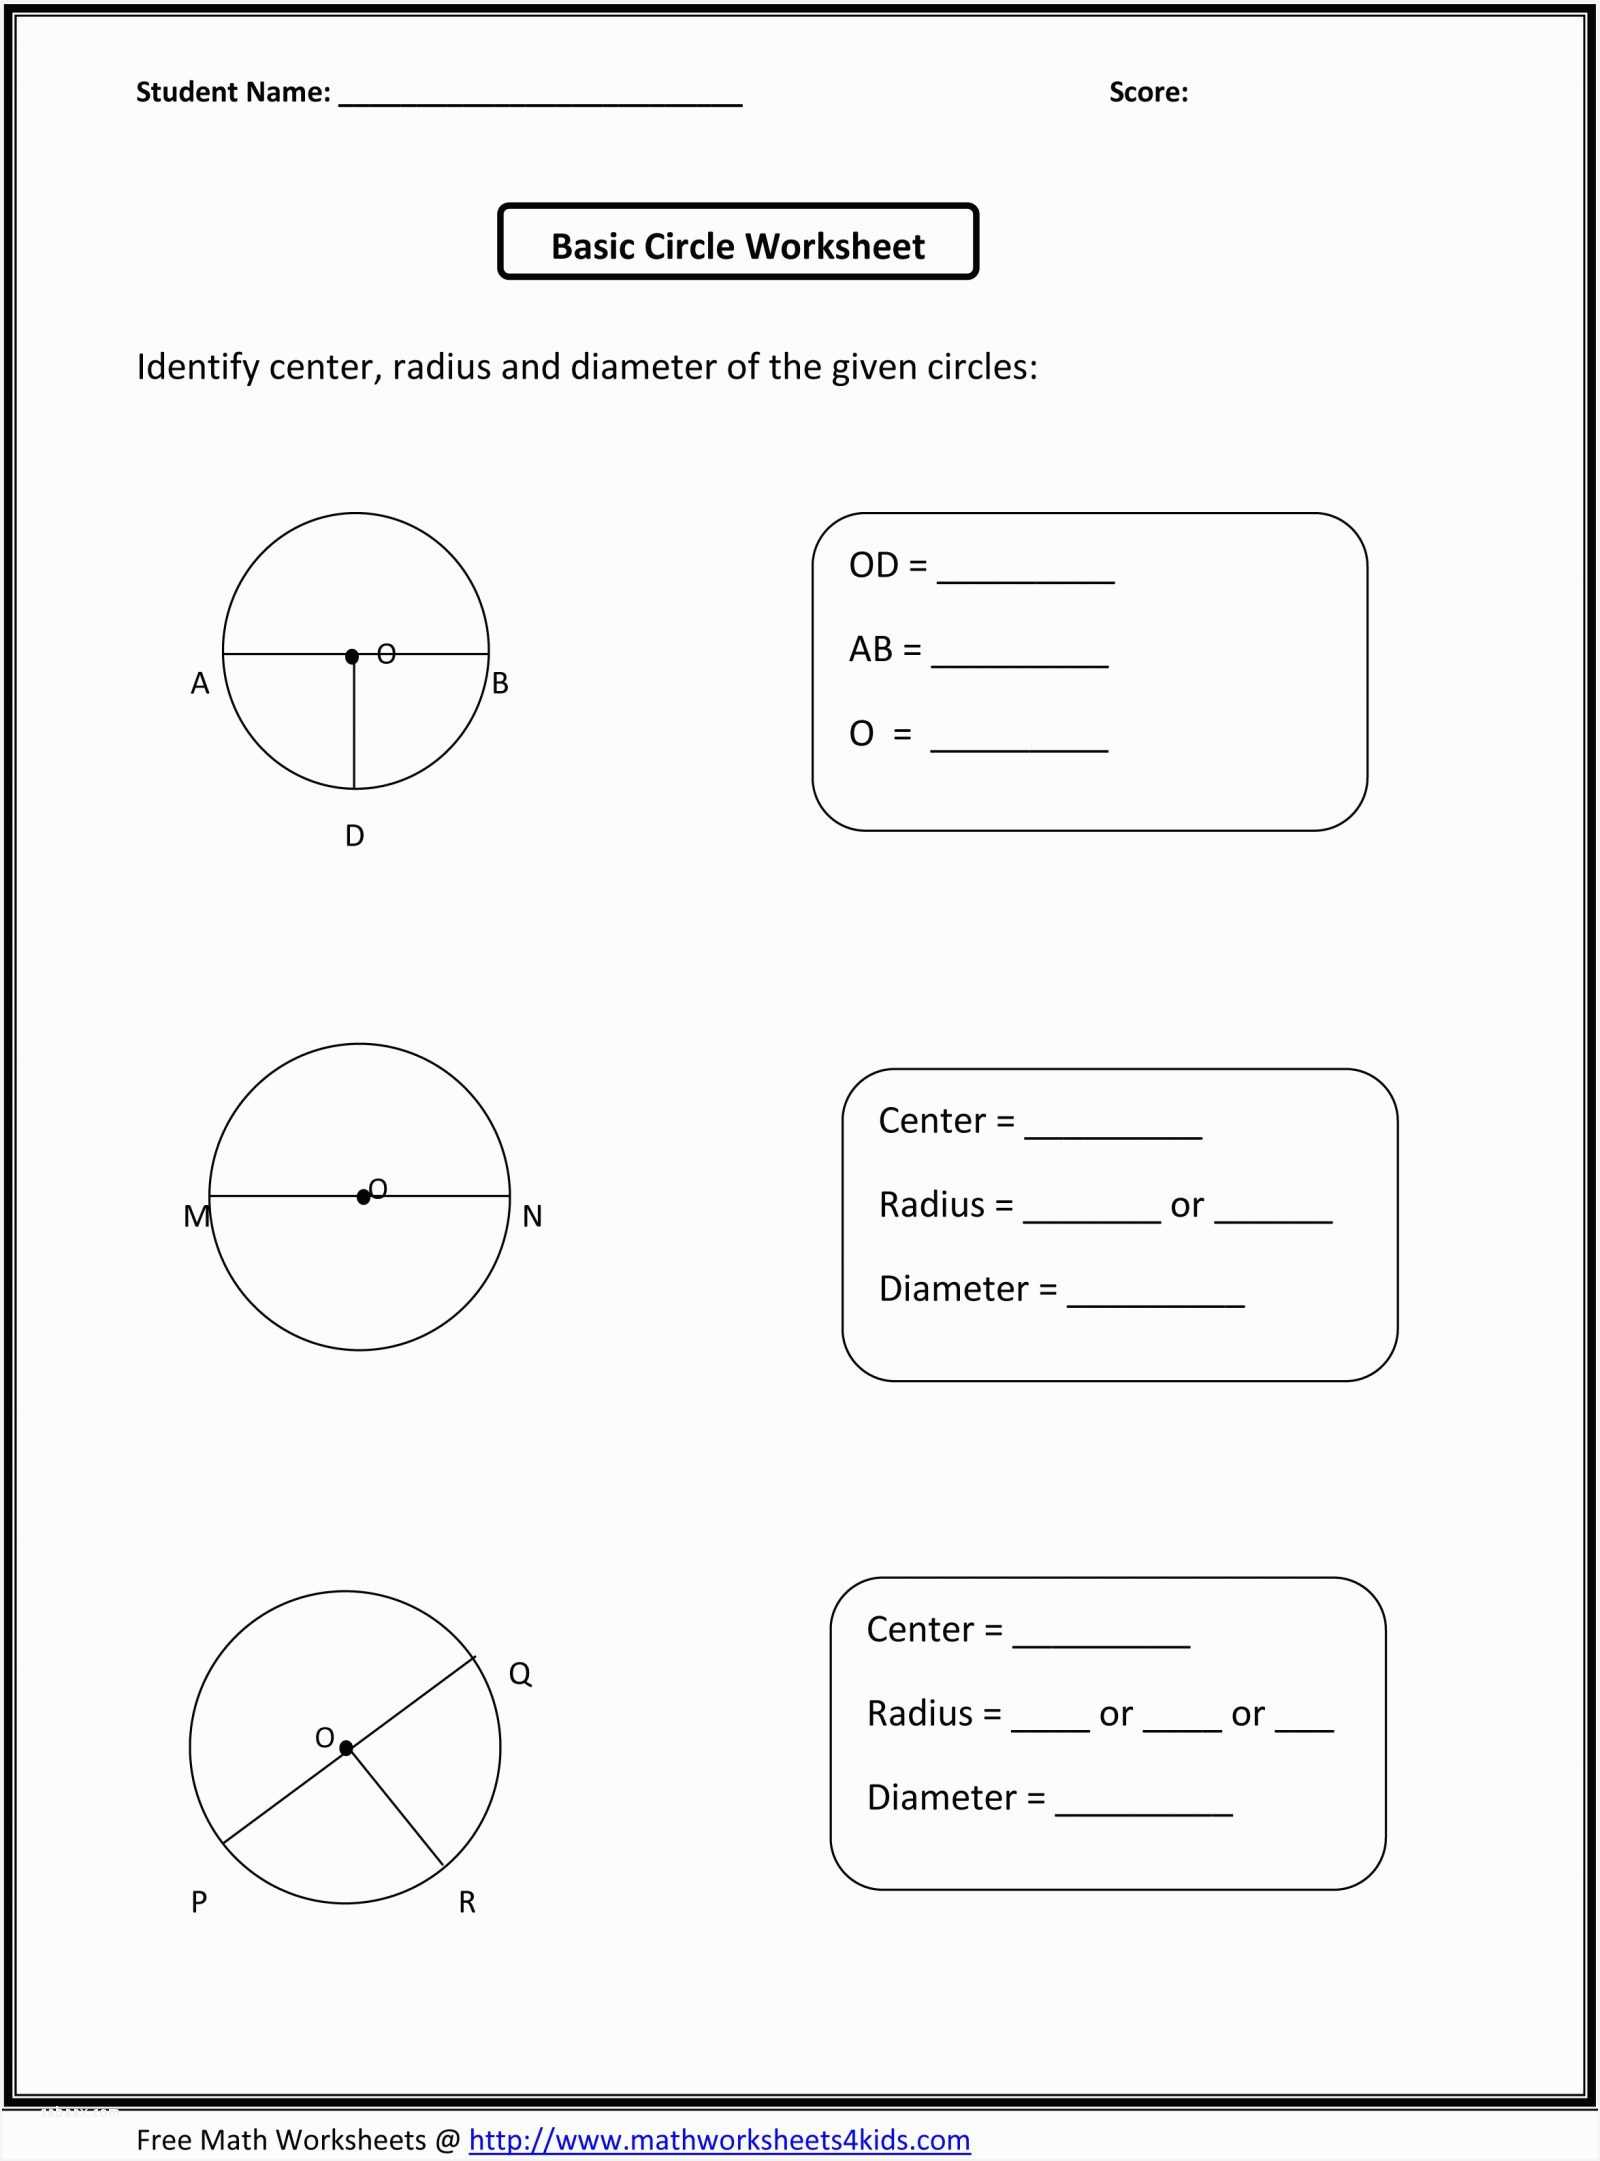 Markup and Discount Worksheet or Mon Core Addition Worksheets Best Mon Core 7th Grade Math